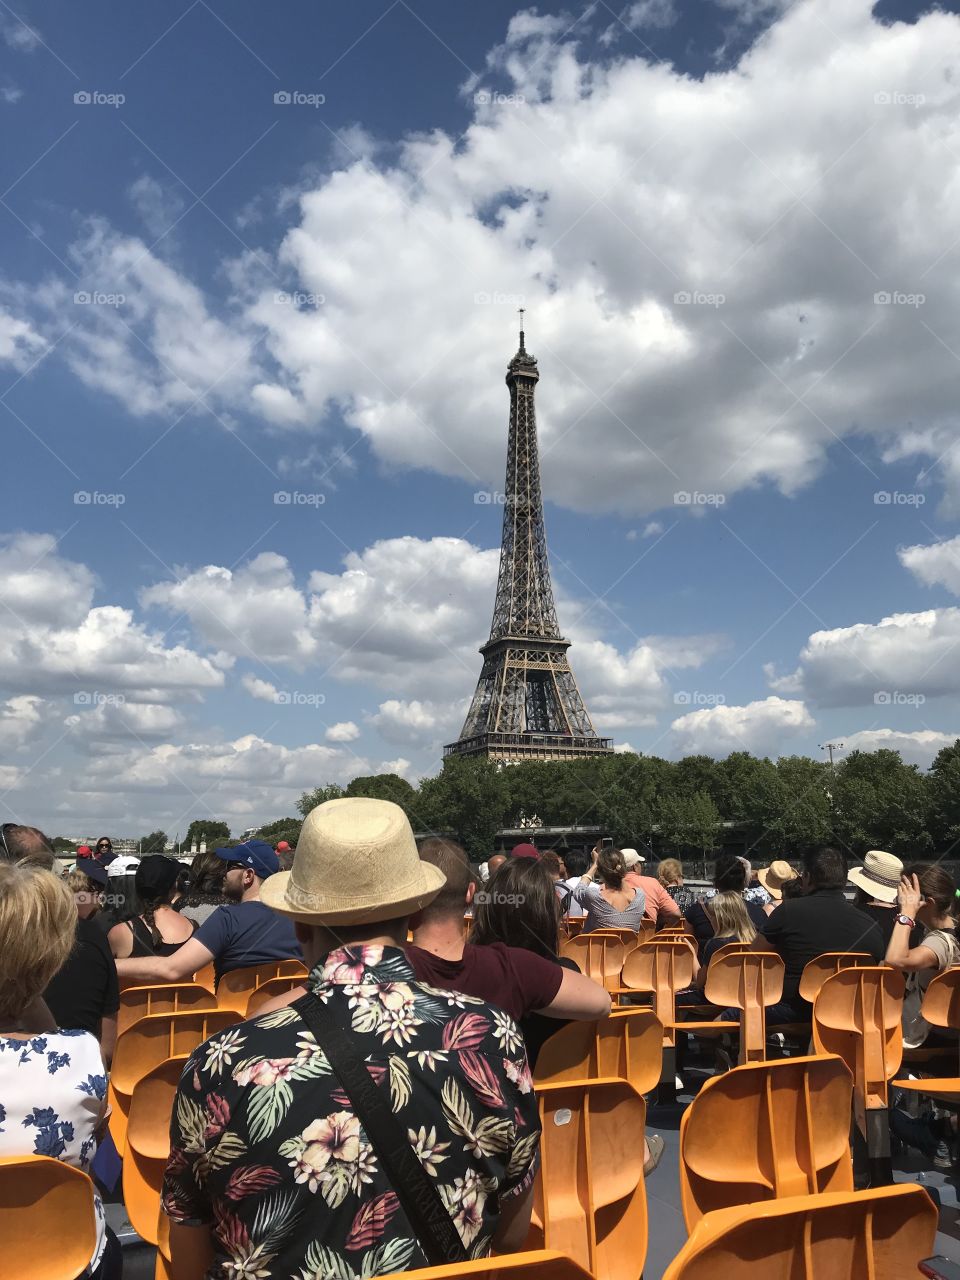 Eiffel Tower seen from a tourism boat